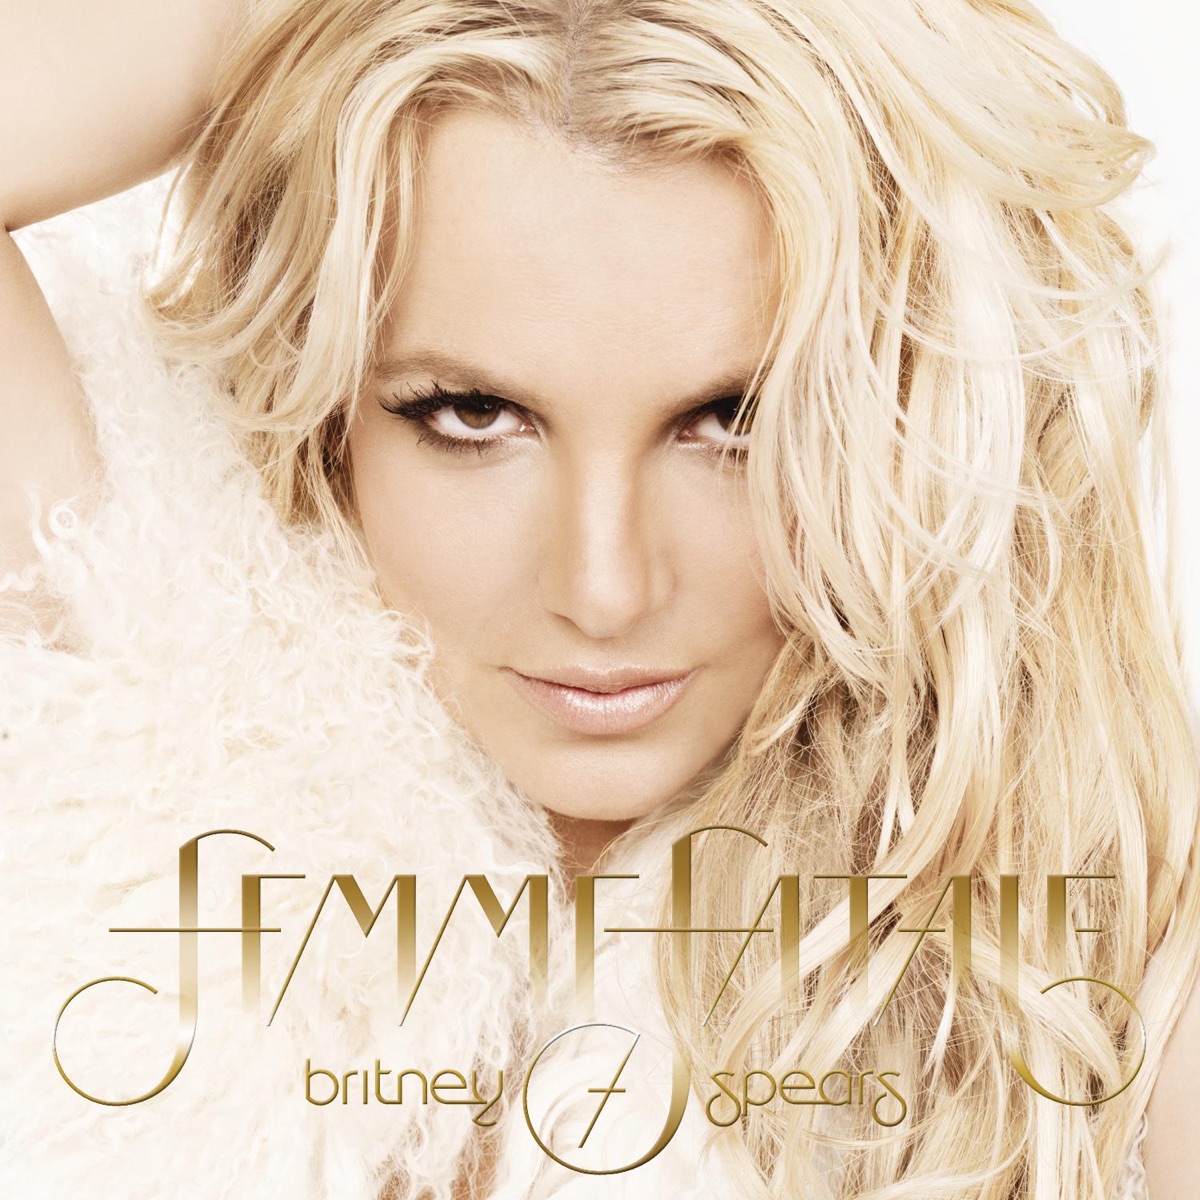 Britney Jean (Deluxe Version) by Britney Spears on Apple Music